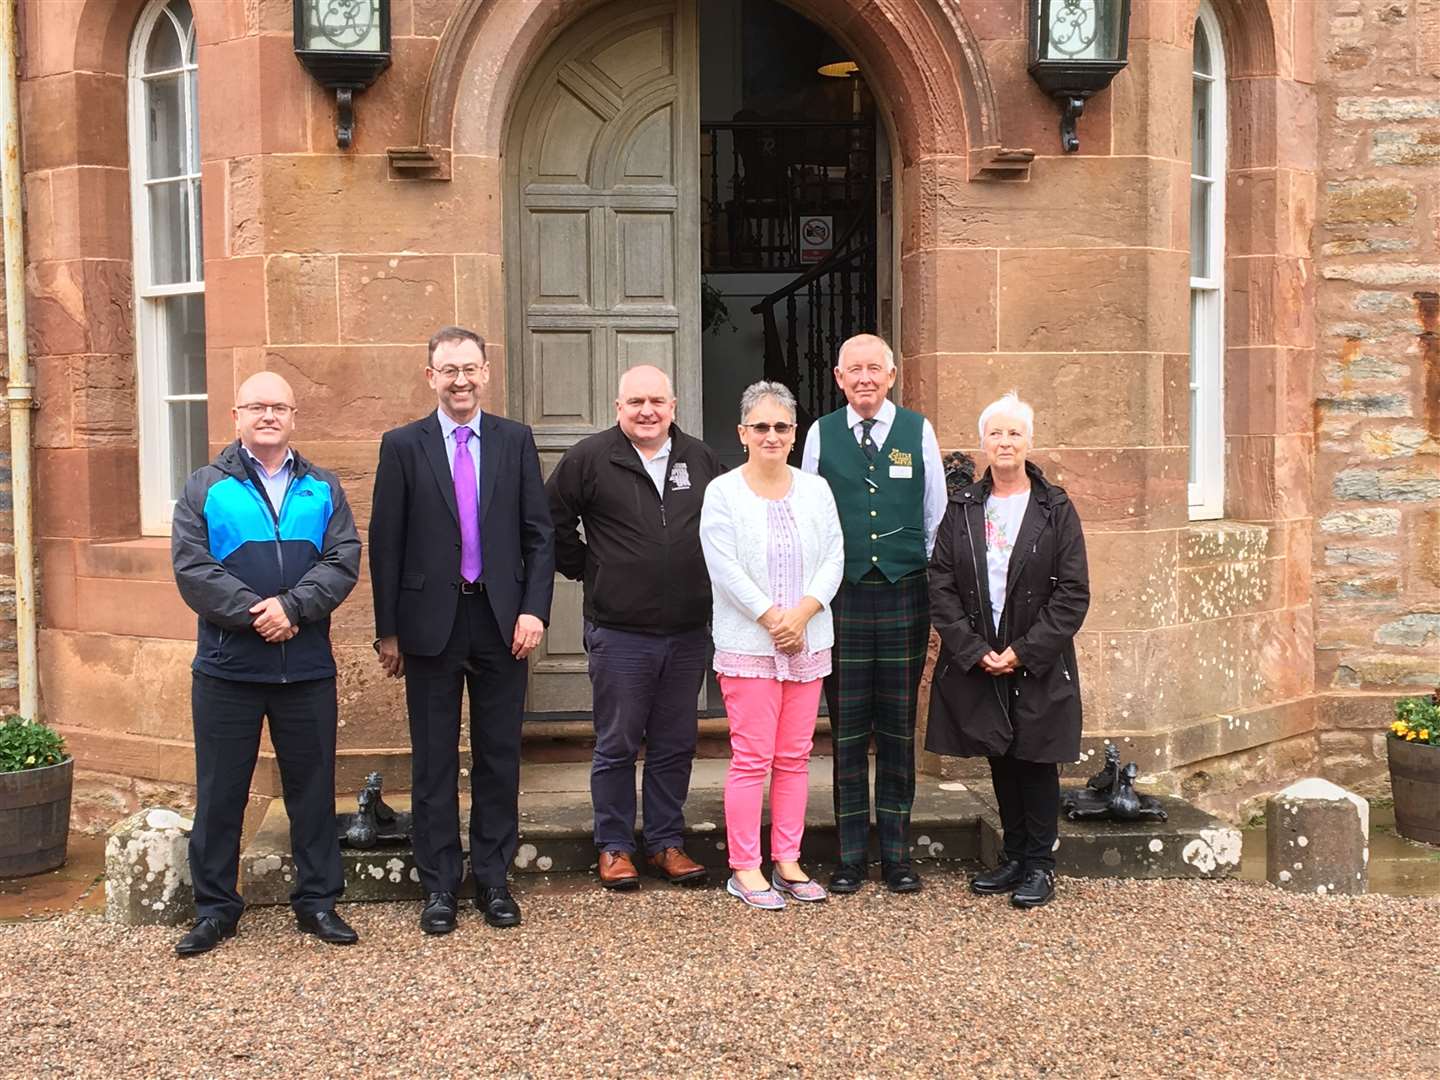 The group of chief executives at the Castle of Mey.